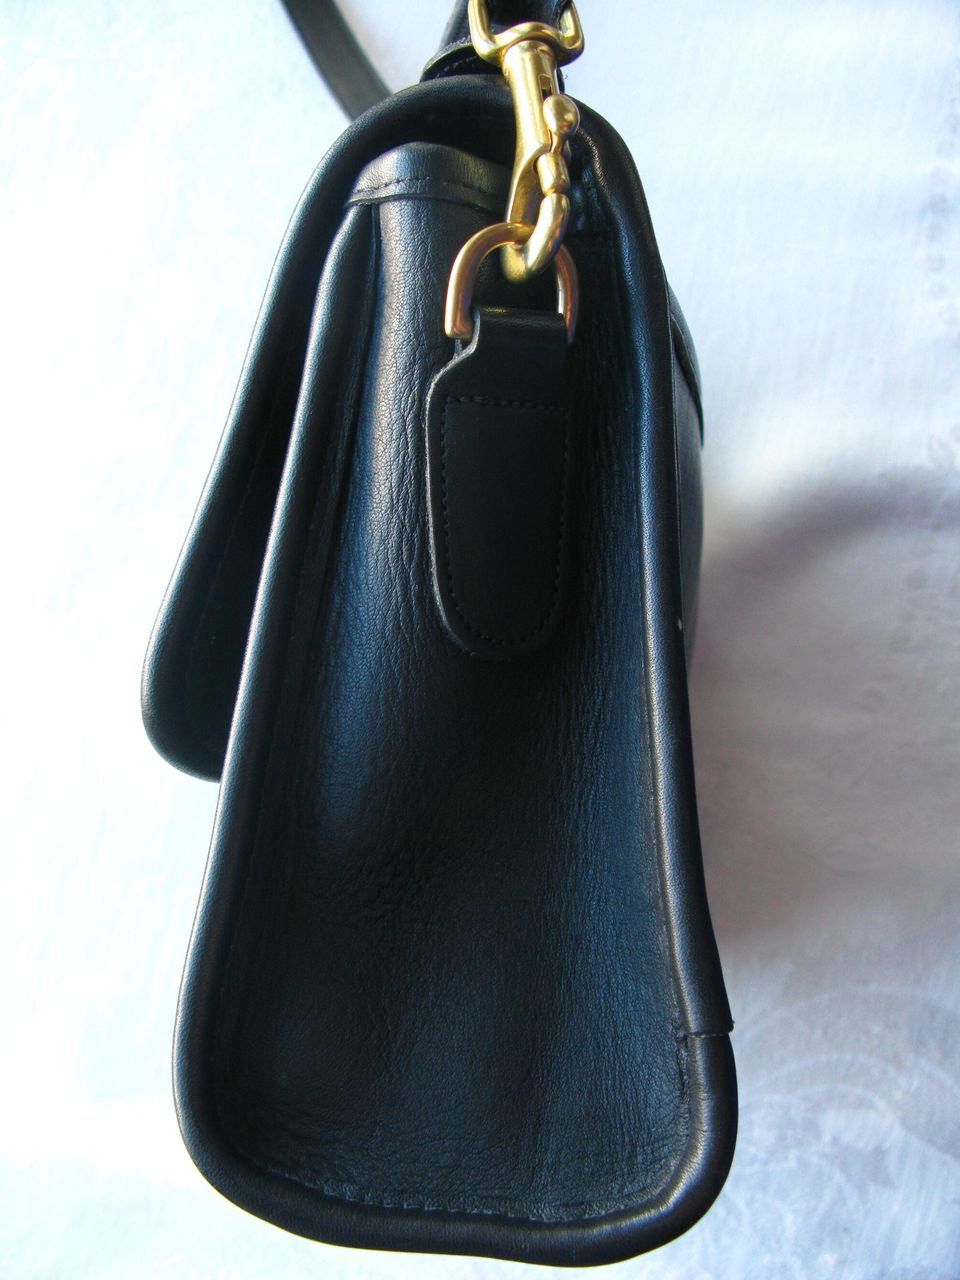 Vintage COACH U S A Black Leather Court Bag from seasonspast on Ruby Lane